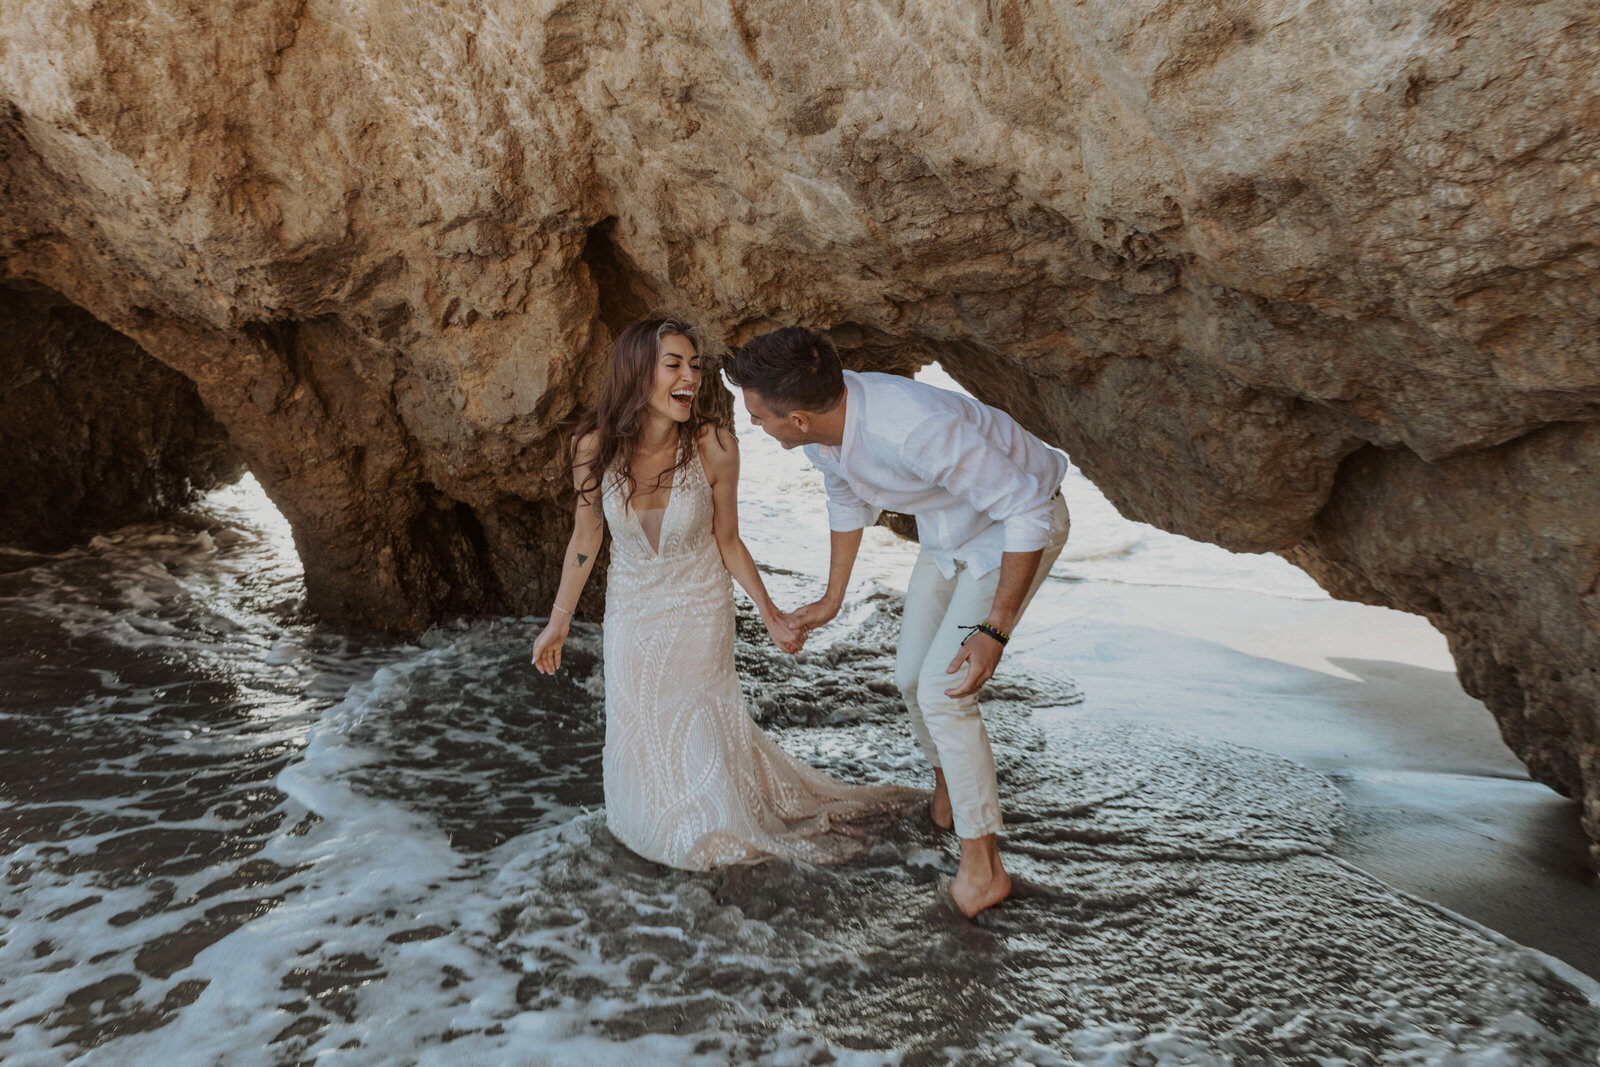 Focus on your love story with a destination wedding photographer who handles the details. Intimate moments, expert guidance in the U.S. and beyond